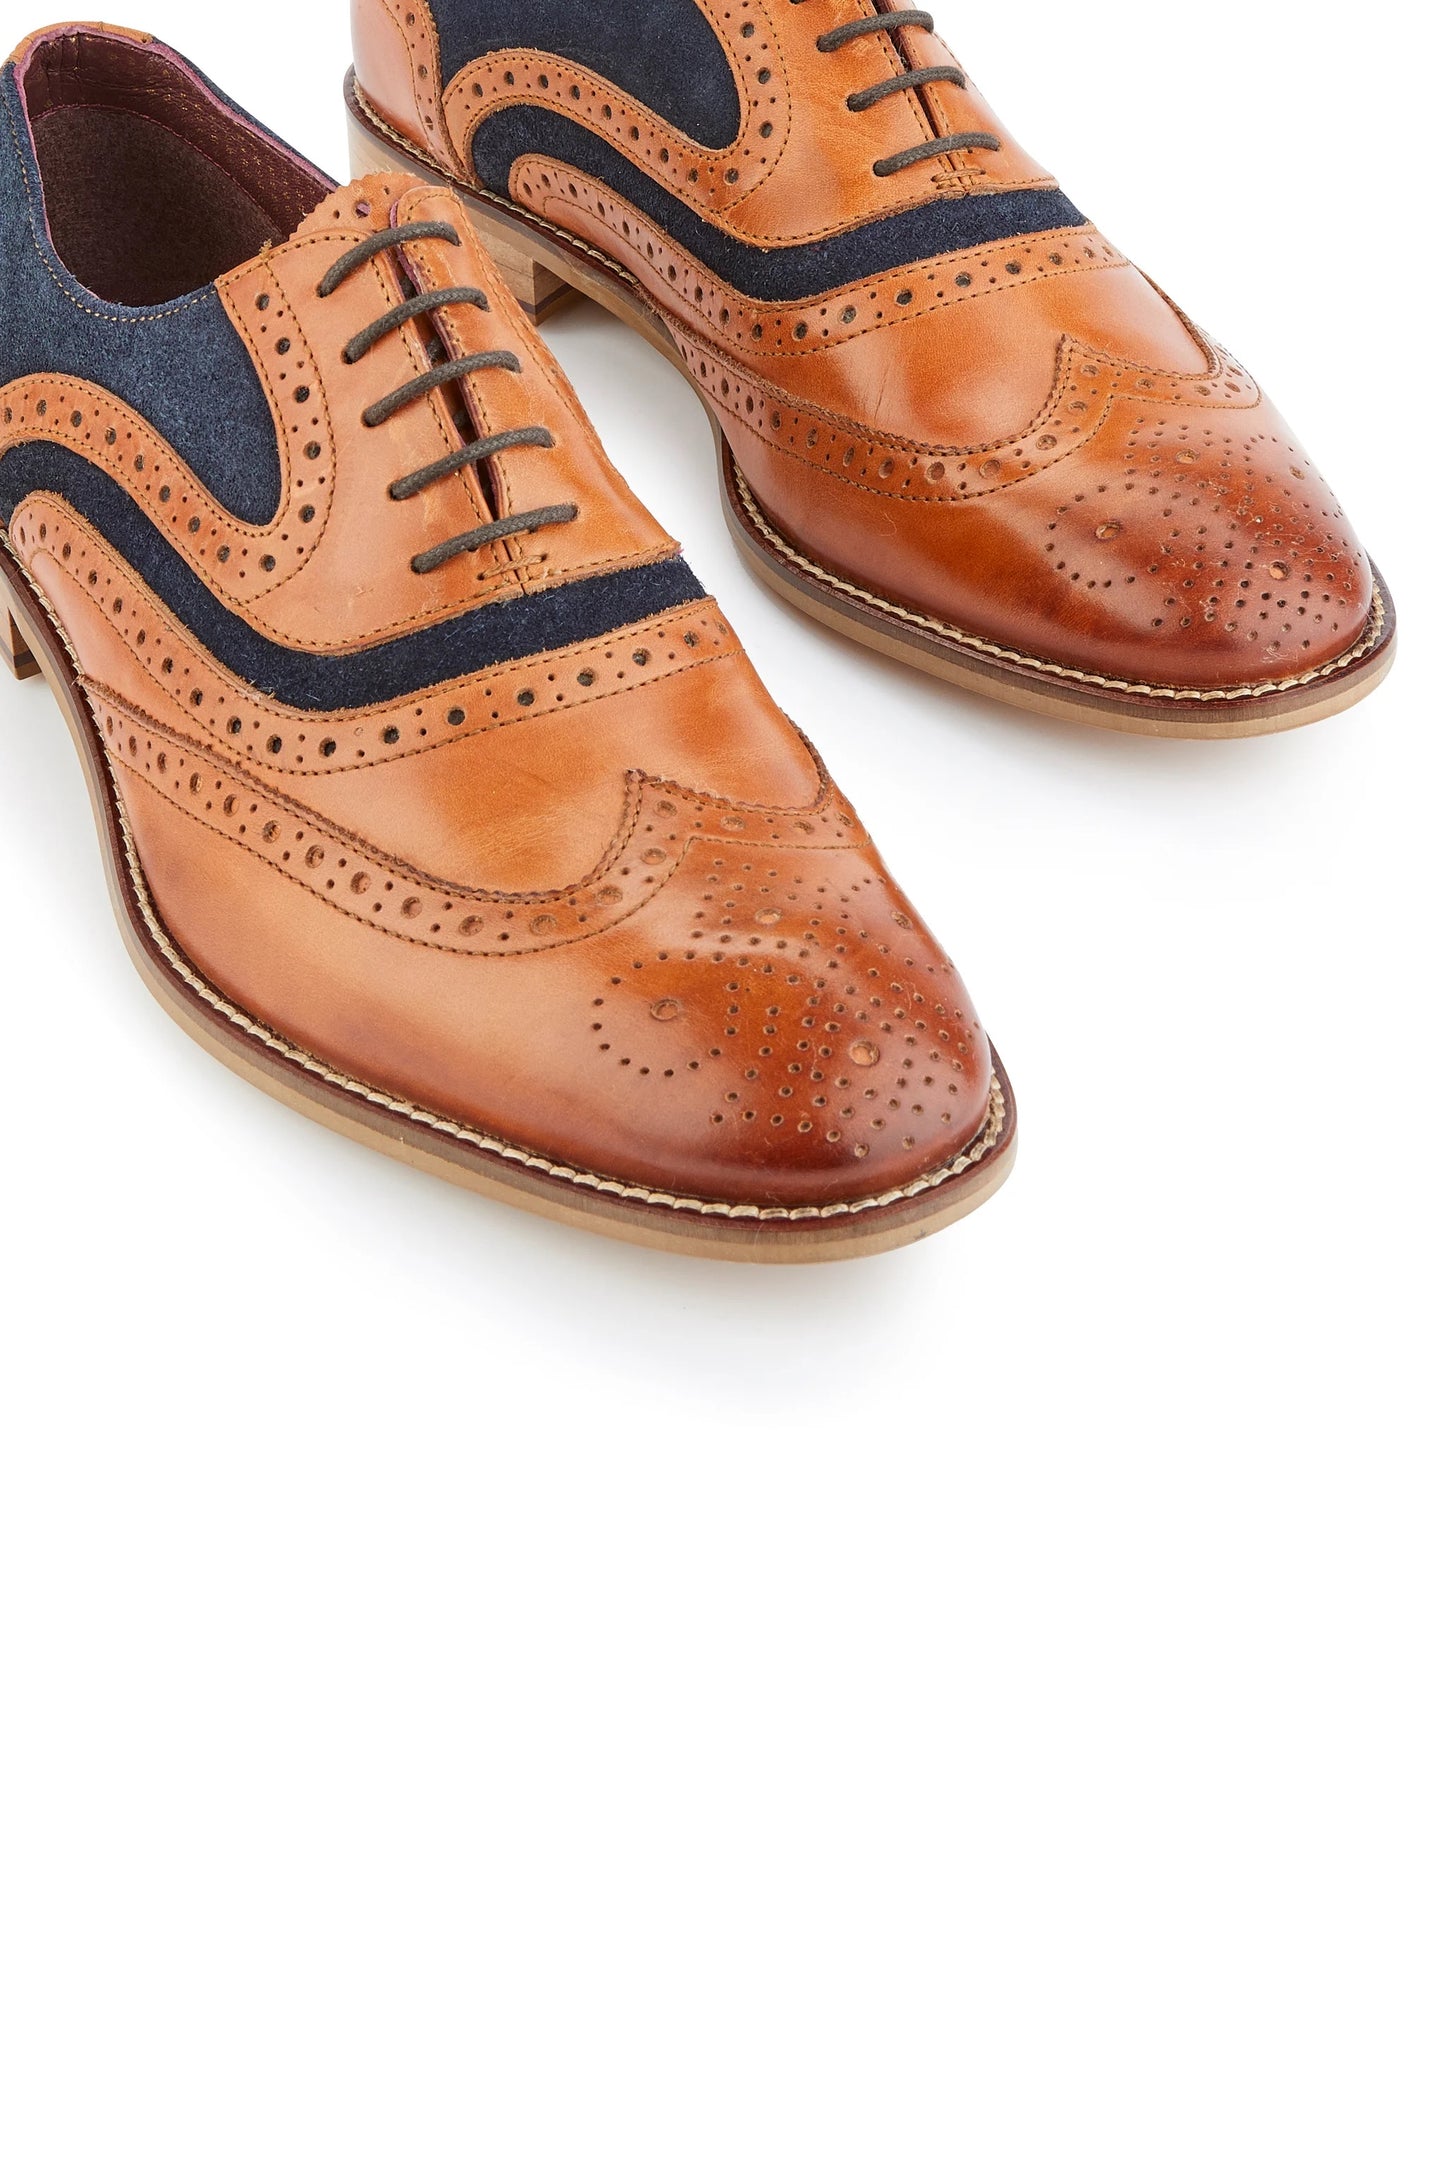 London Brogues Shelby Oxford Tan / Navy Leather Brogue Shoes